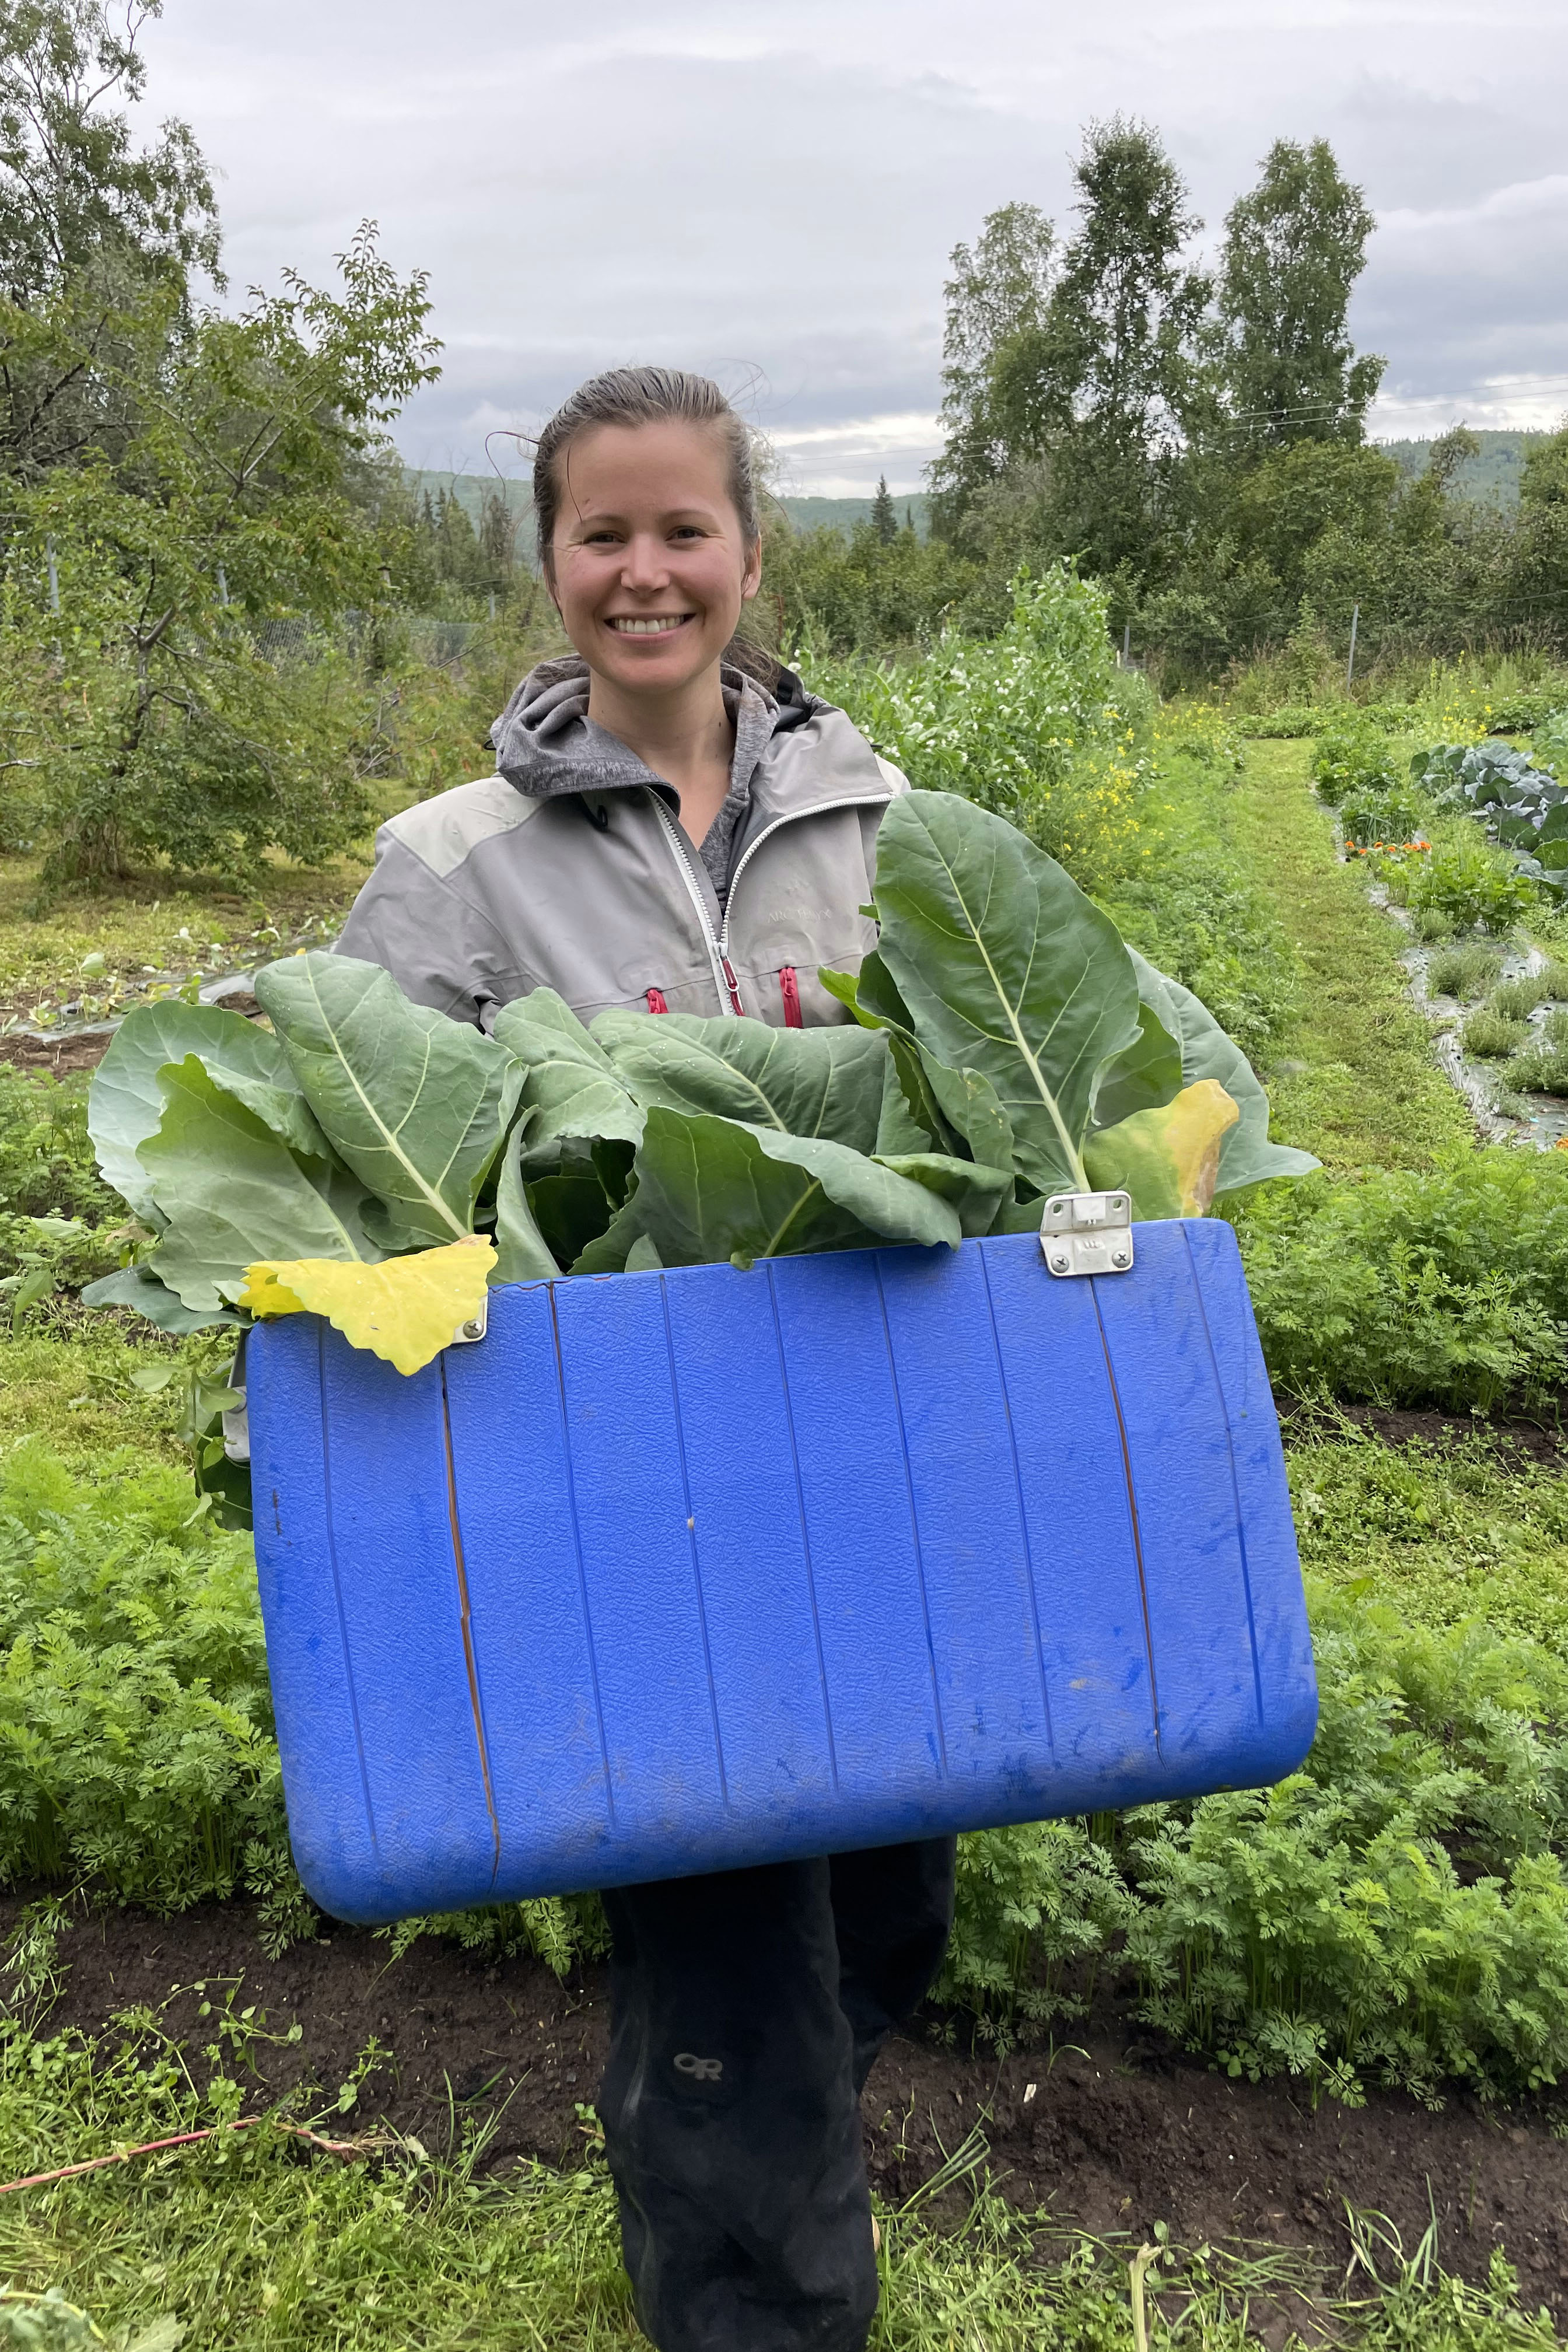 Woman with a cooler filled with produce.